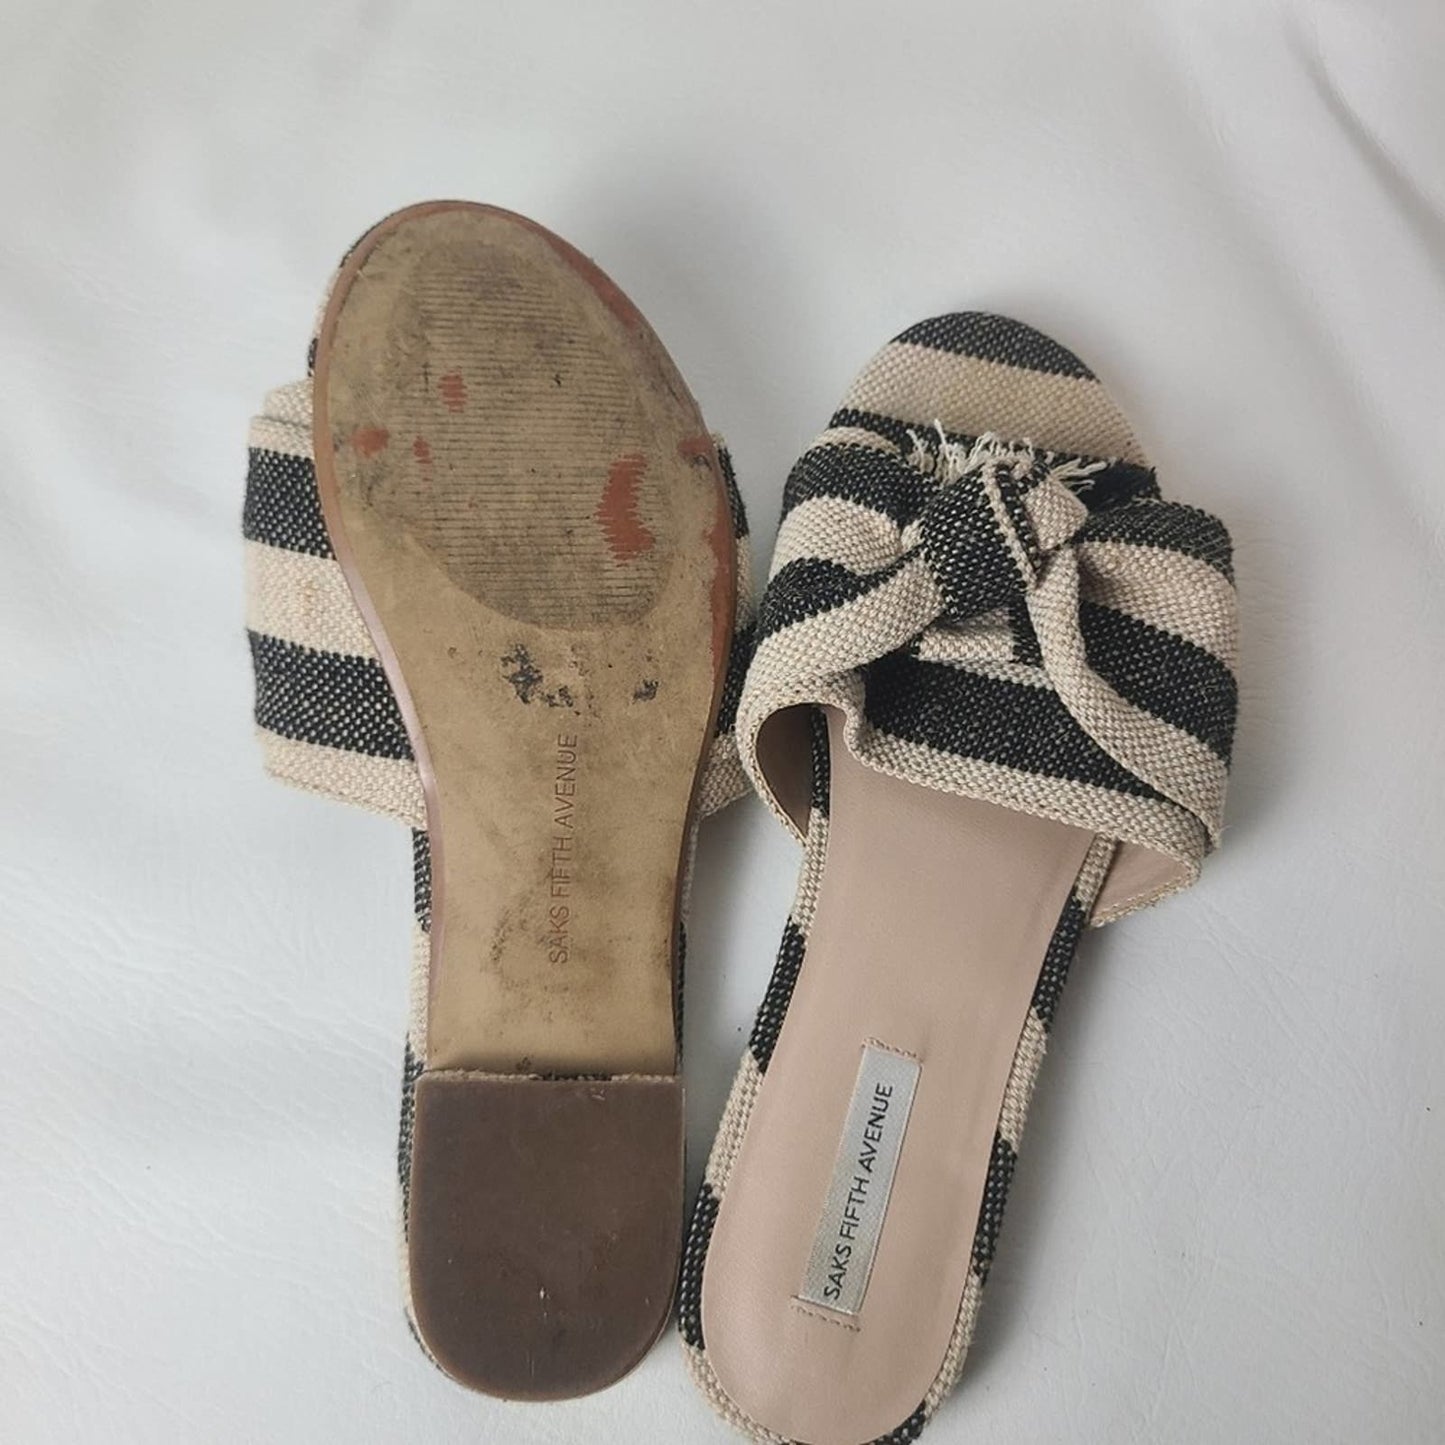 Saks Fifth Ave Black and White Striped Slip On Sandals - 7